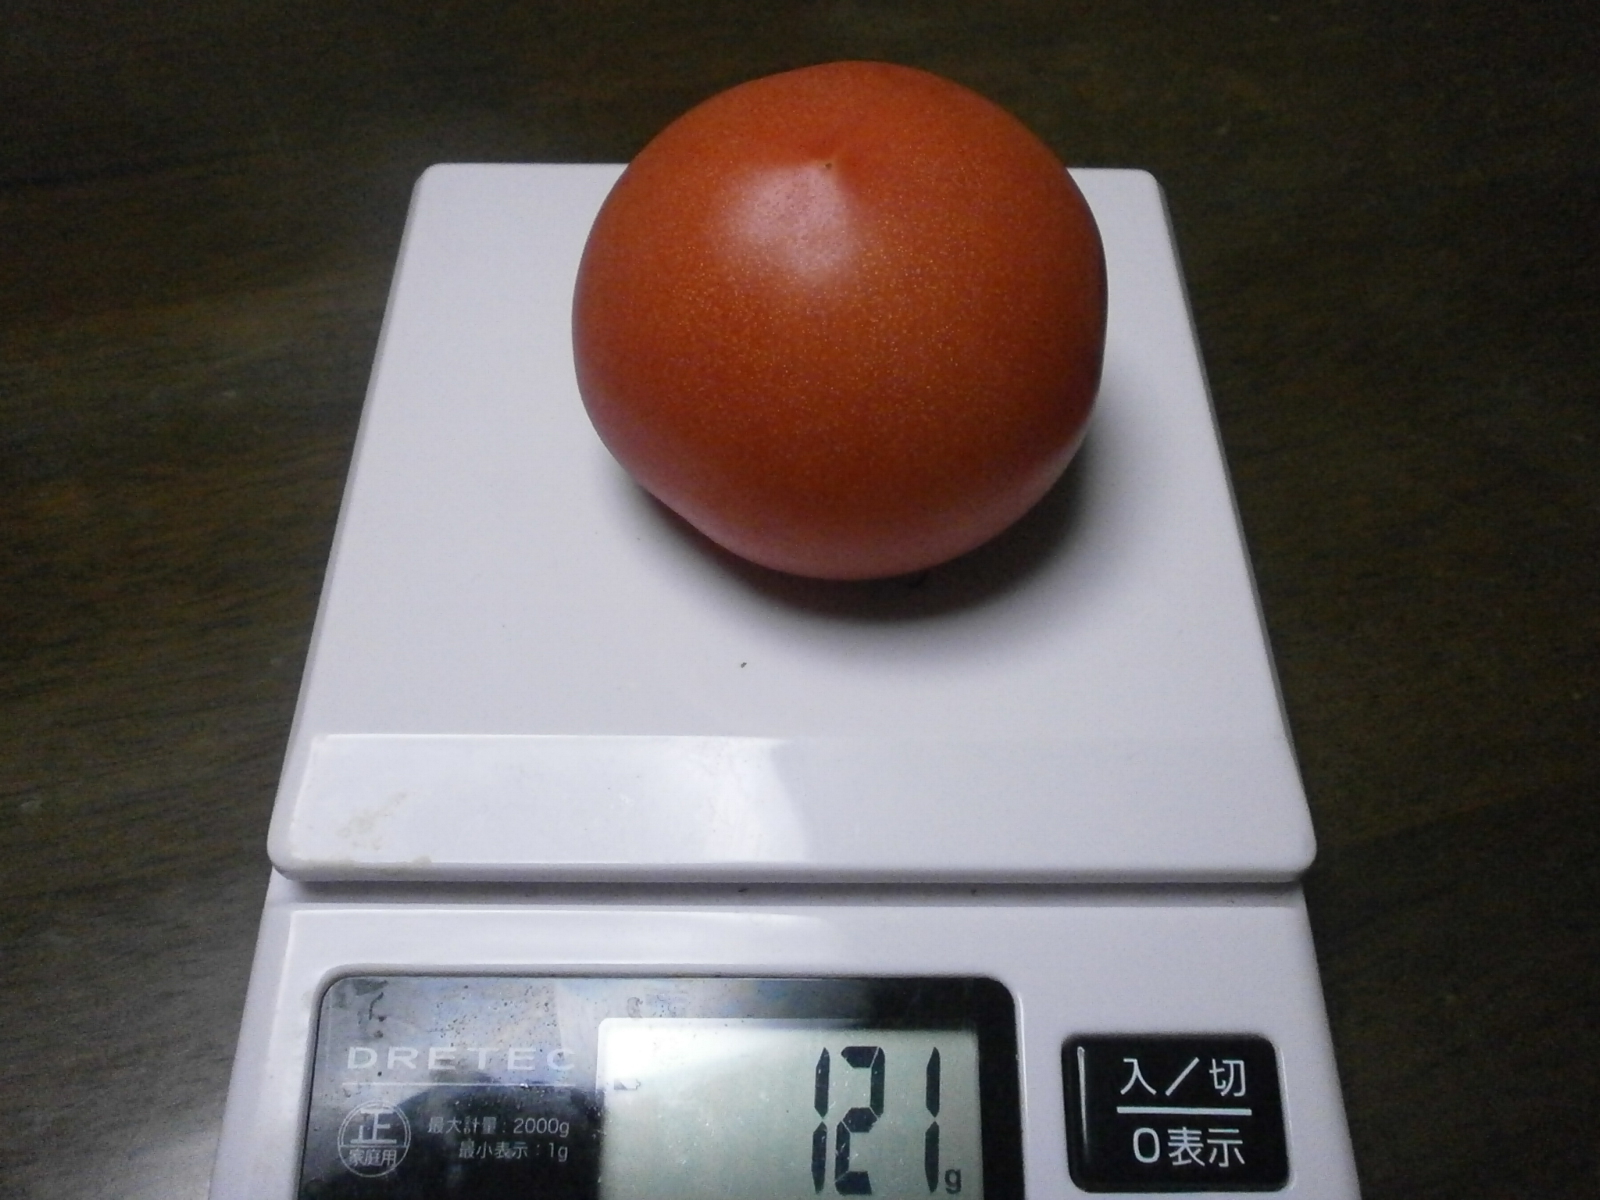 Tomate (141 / 136 g a 121 g/120 g g)